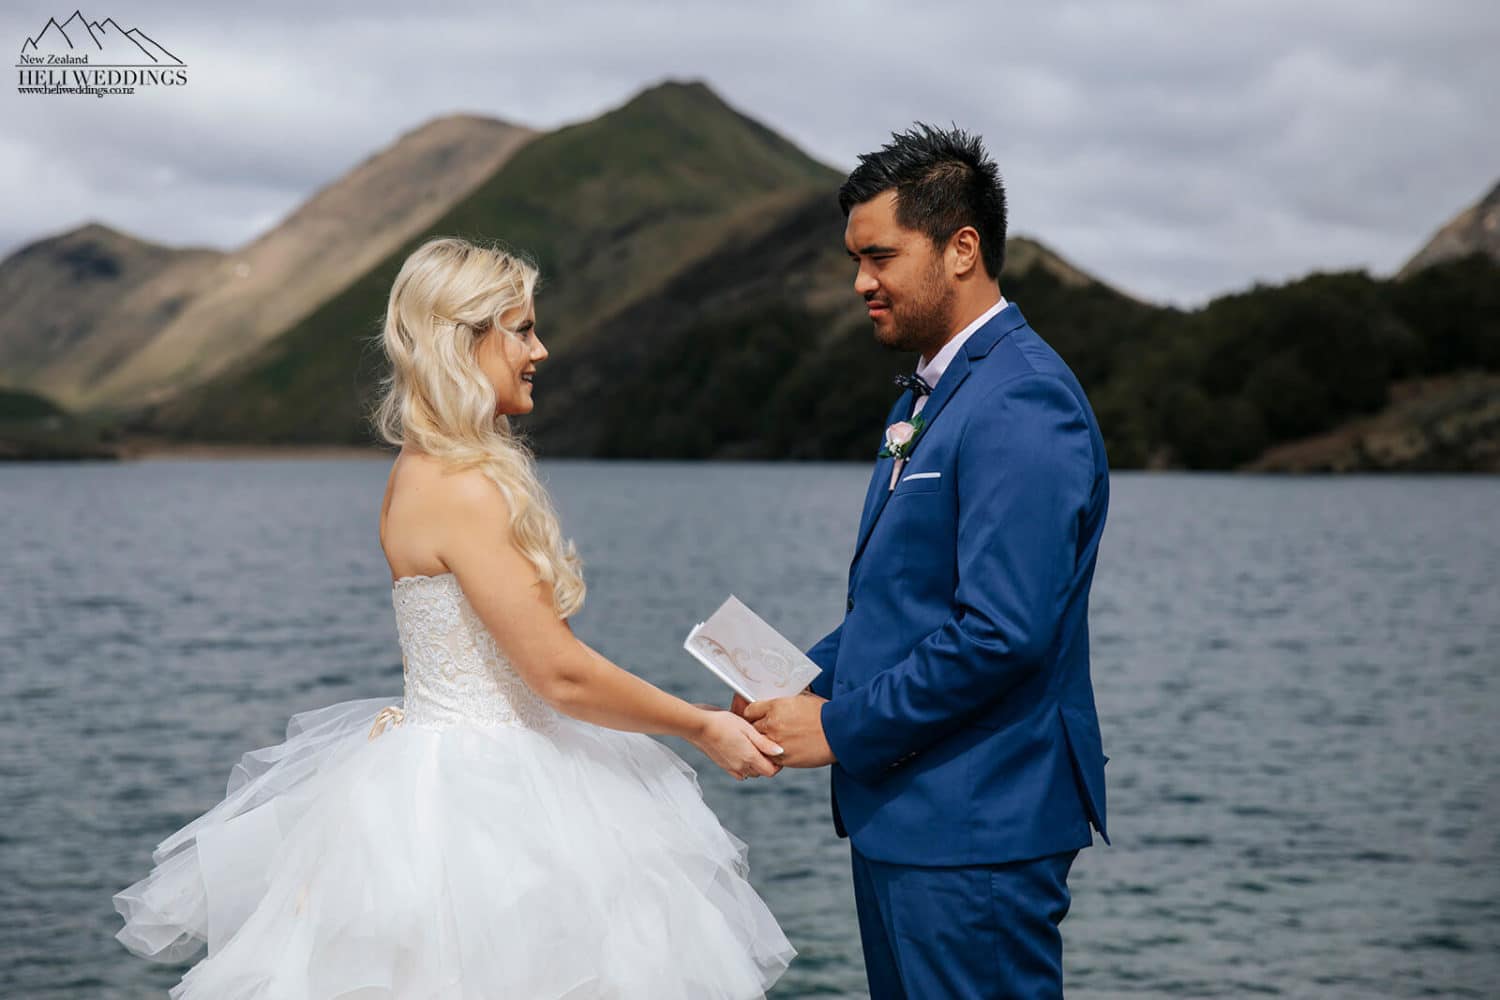 Wedding ceremony and wedding photography at Moke Lake Queenstown